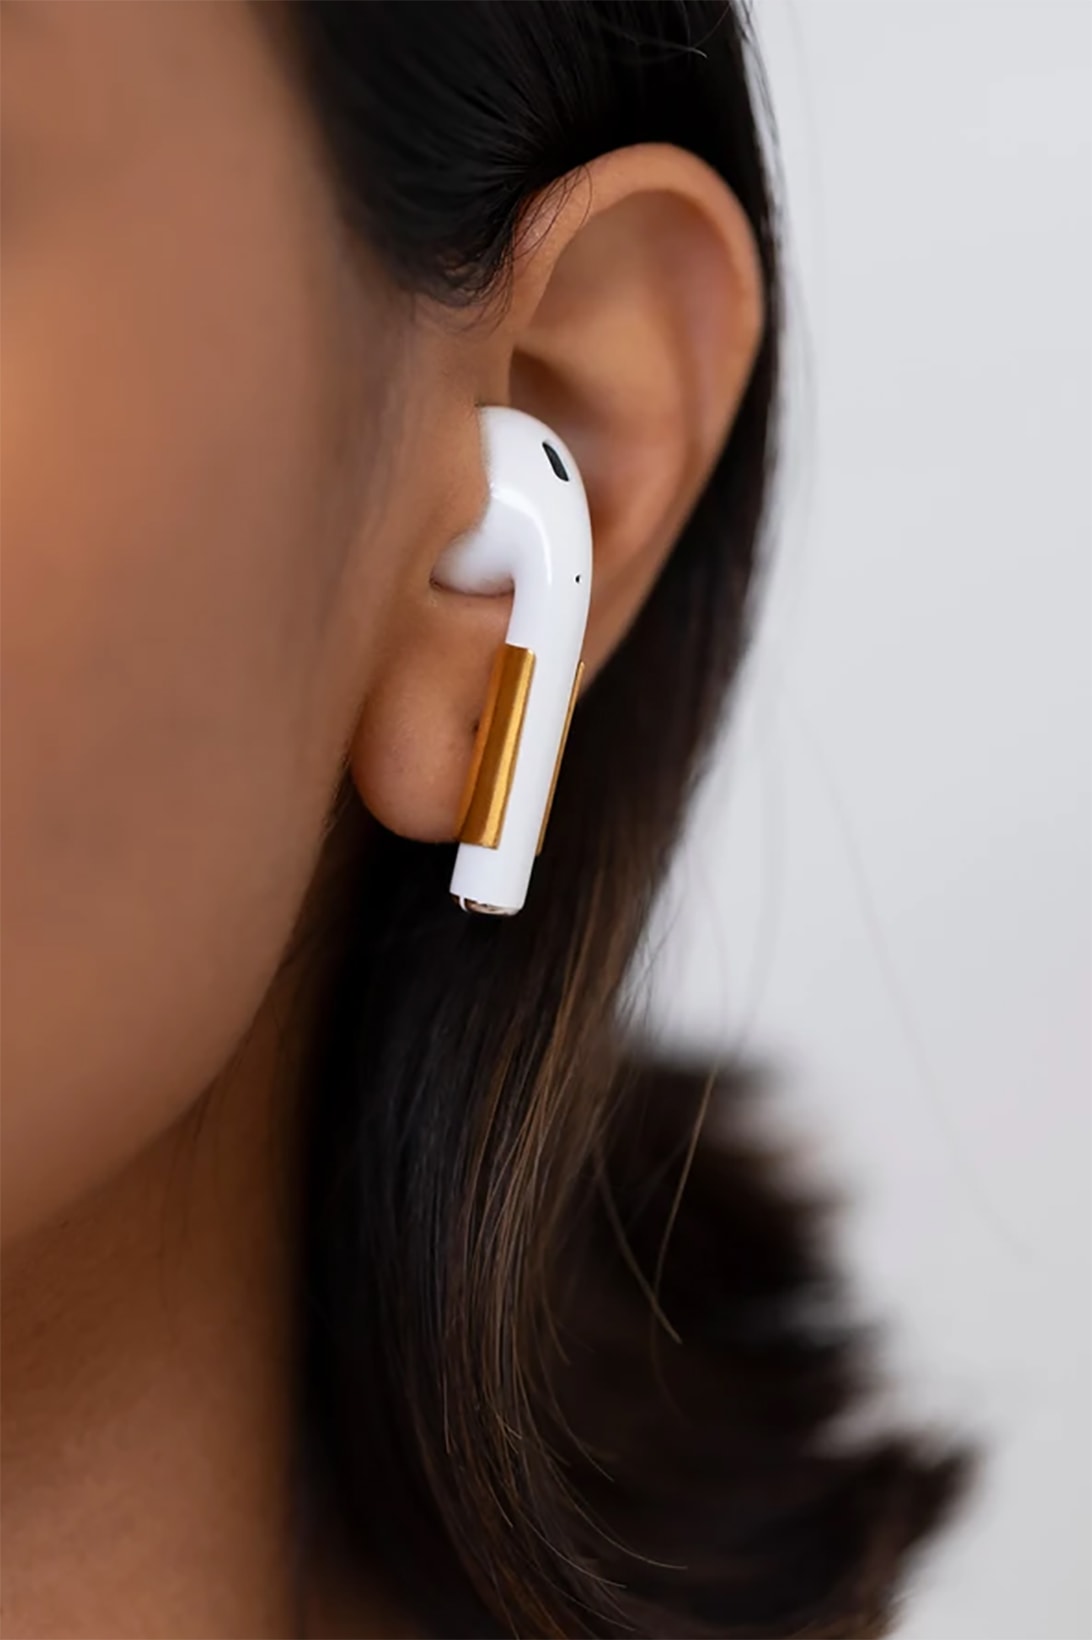 misho airpods earrings jewelry pebble minimal active tall pods gold accessories